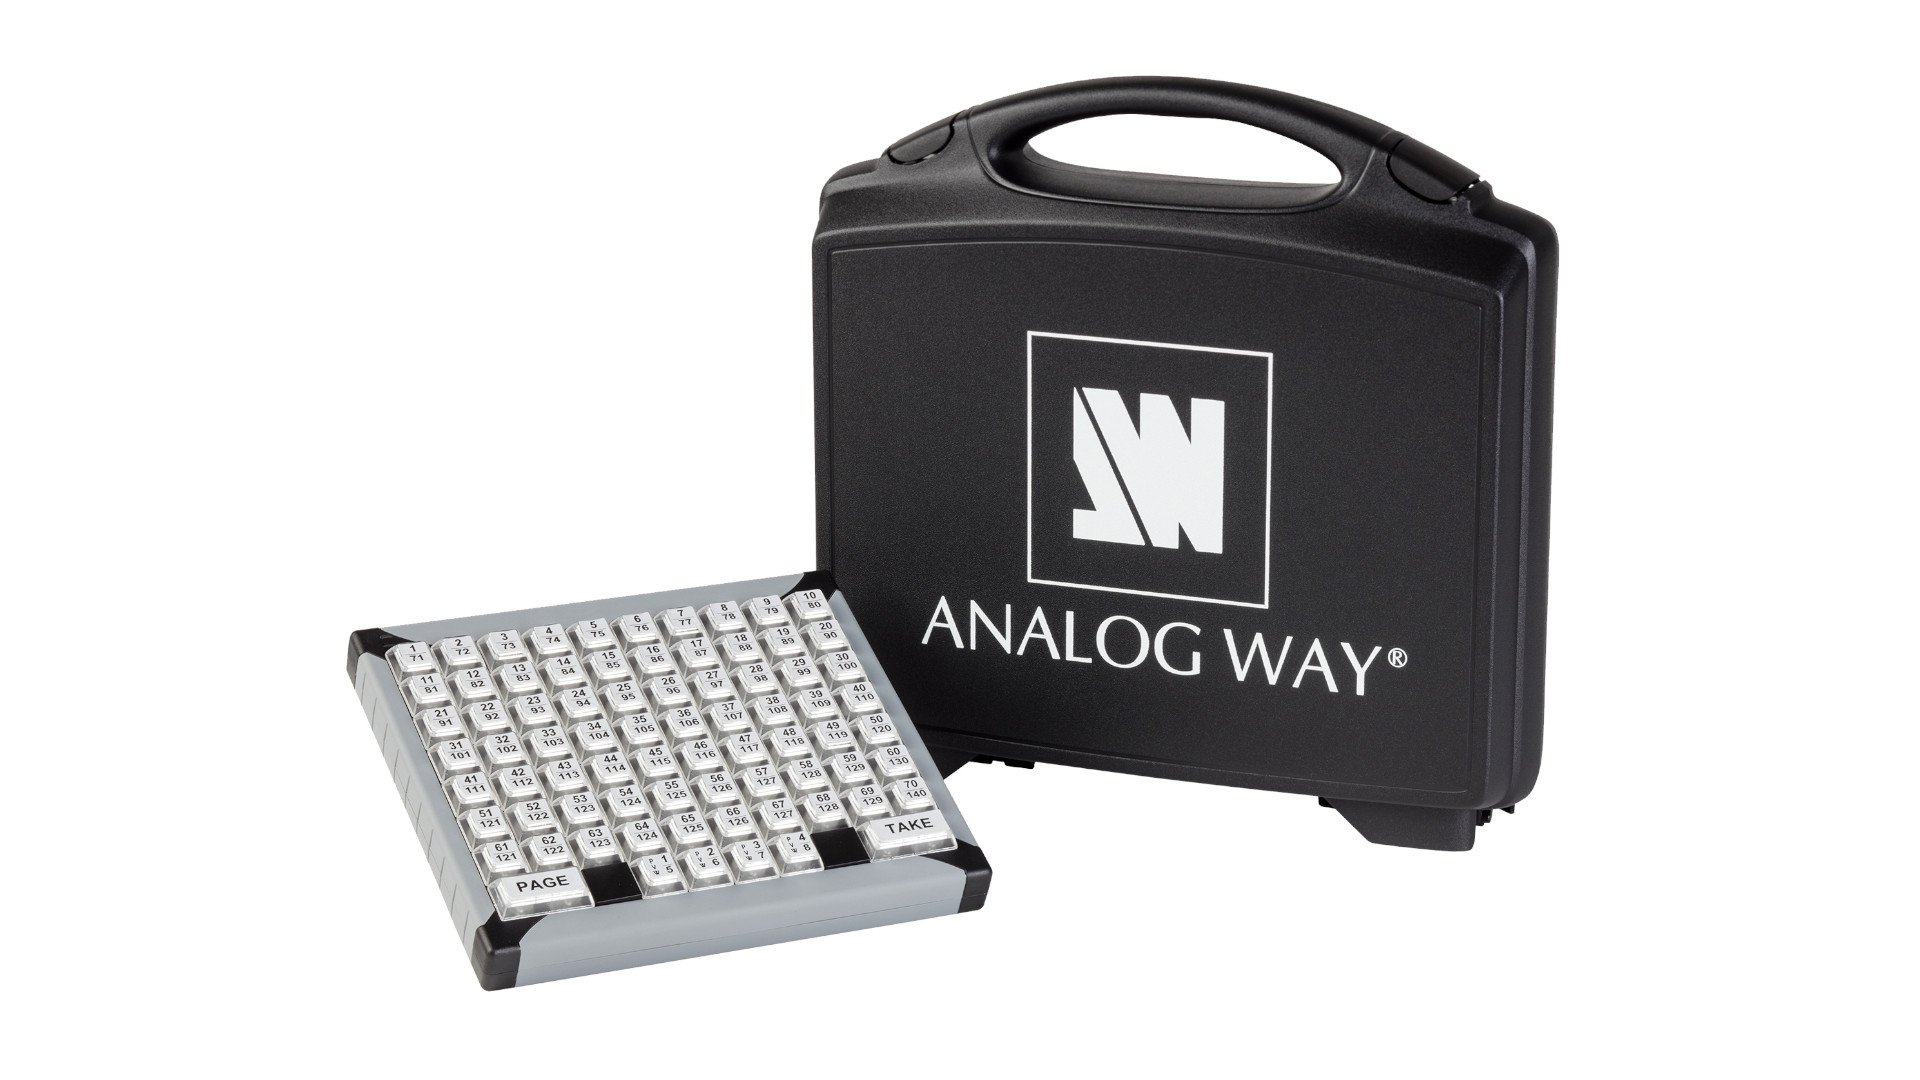 Analog Way livecore control box available for rent at Novelty Spain